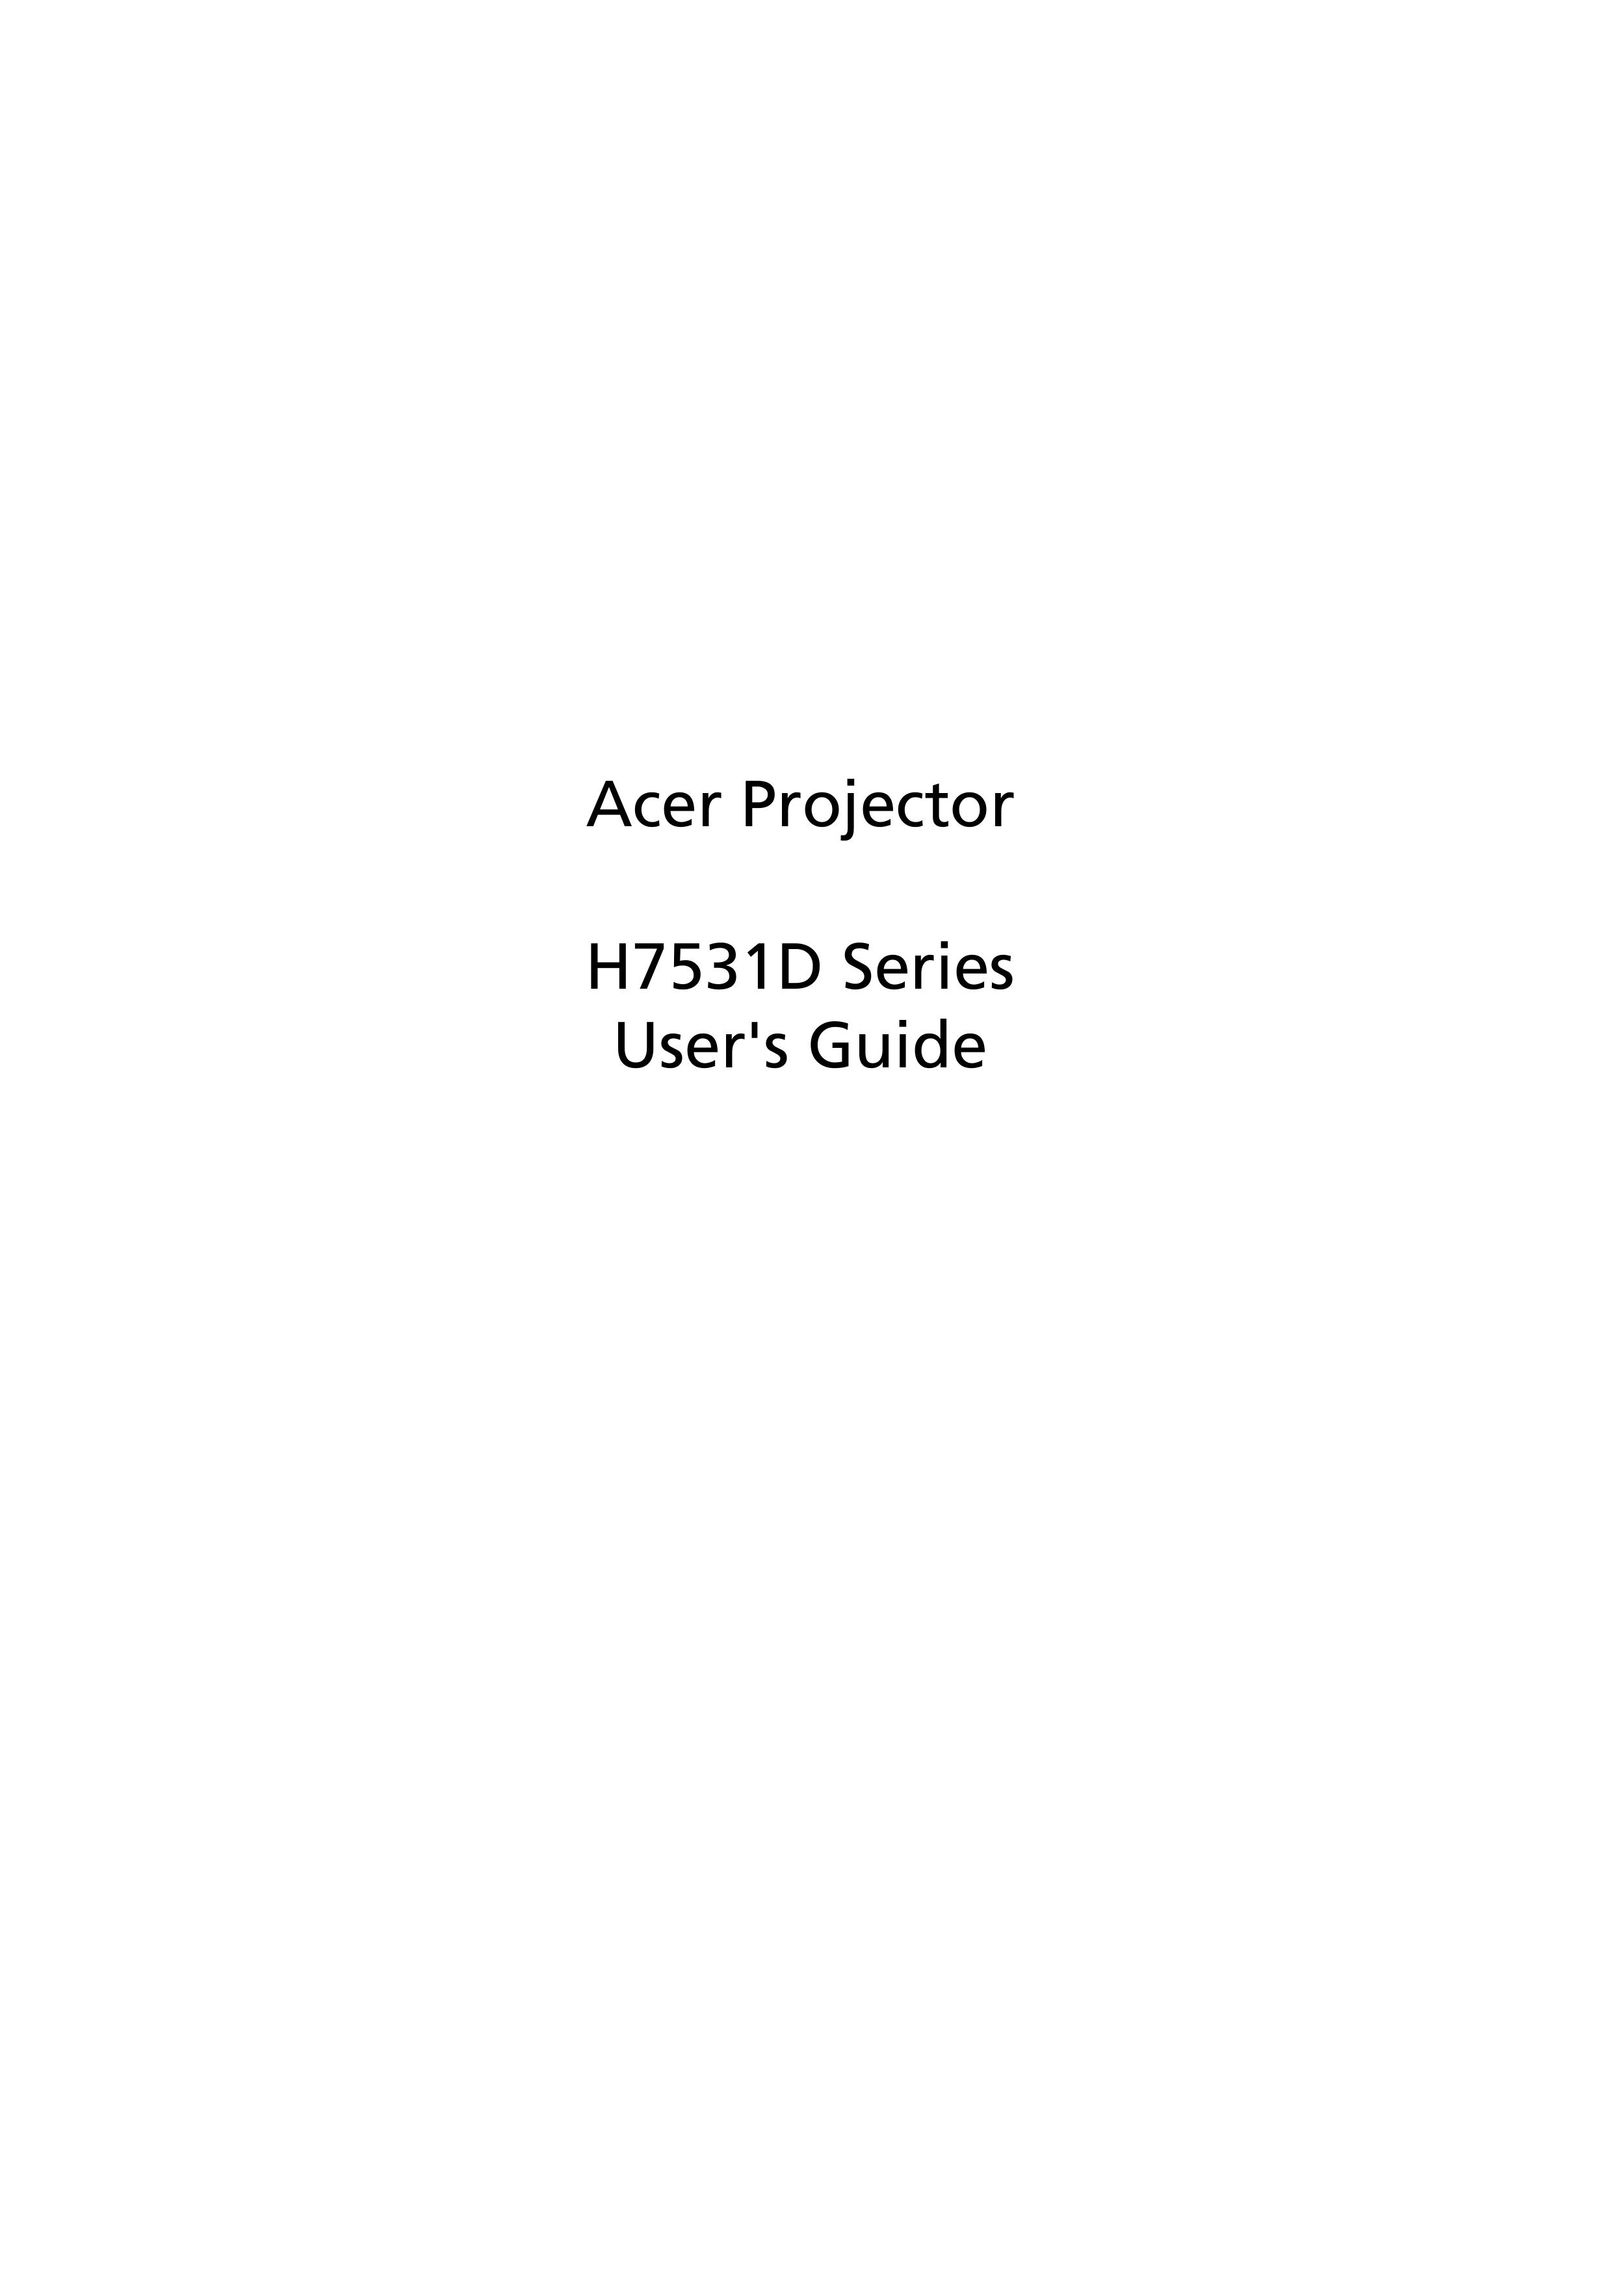 Acer H7531D Projector User Manual